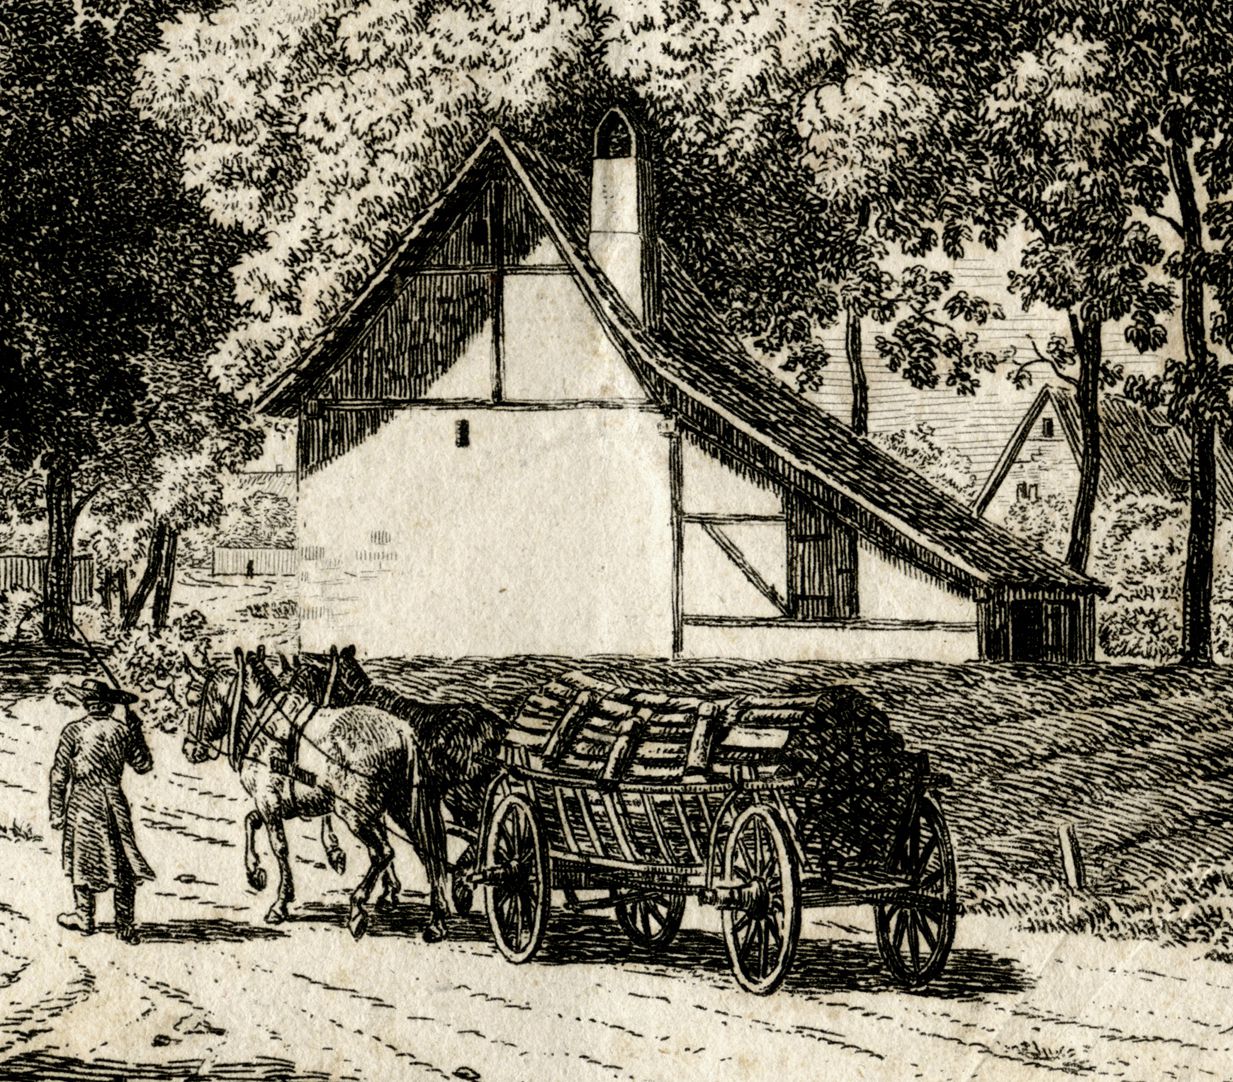 The castle in Nuremberg, seen from Judenbühl Detail with cart and house